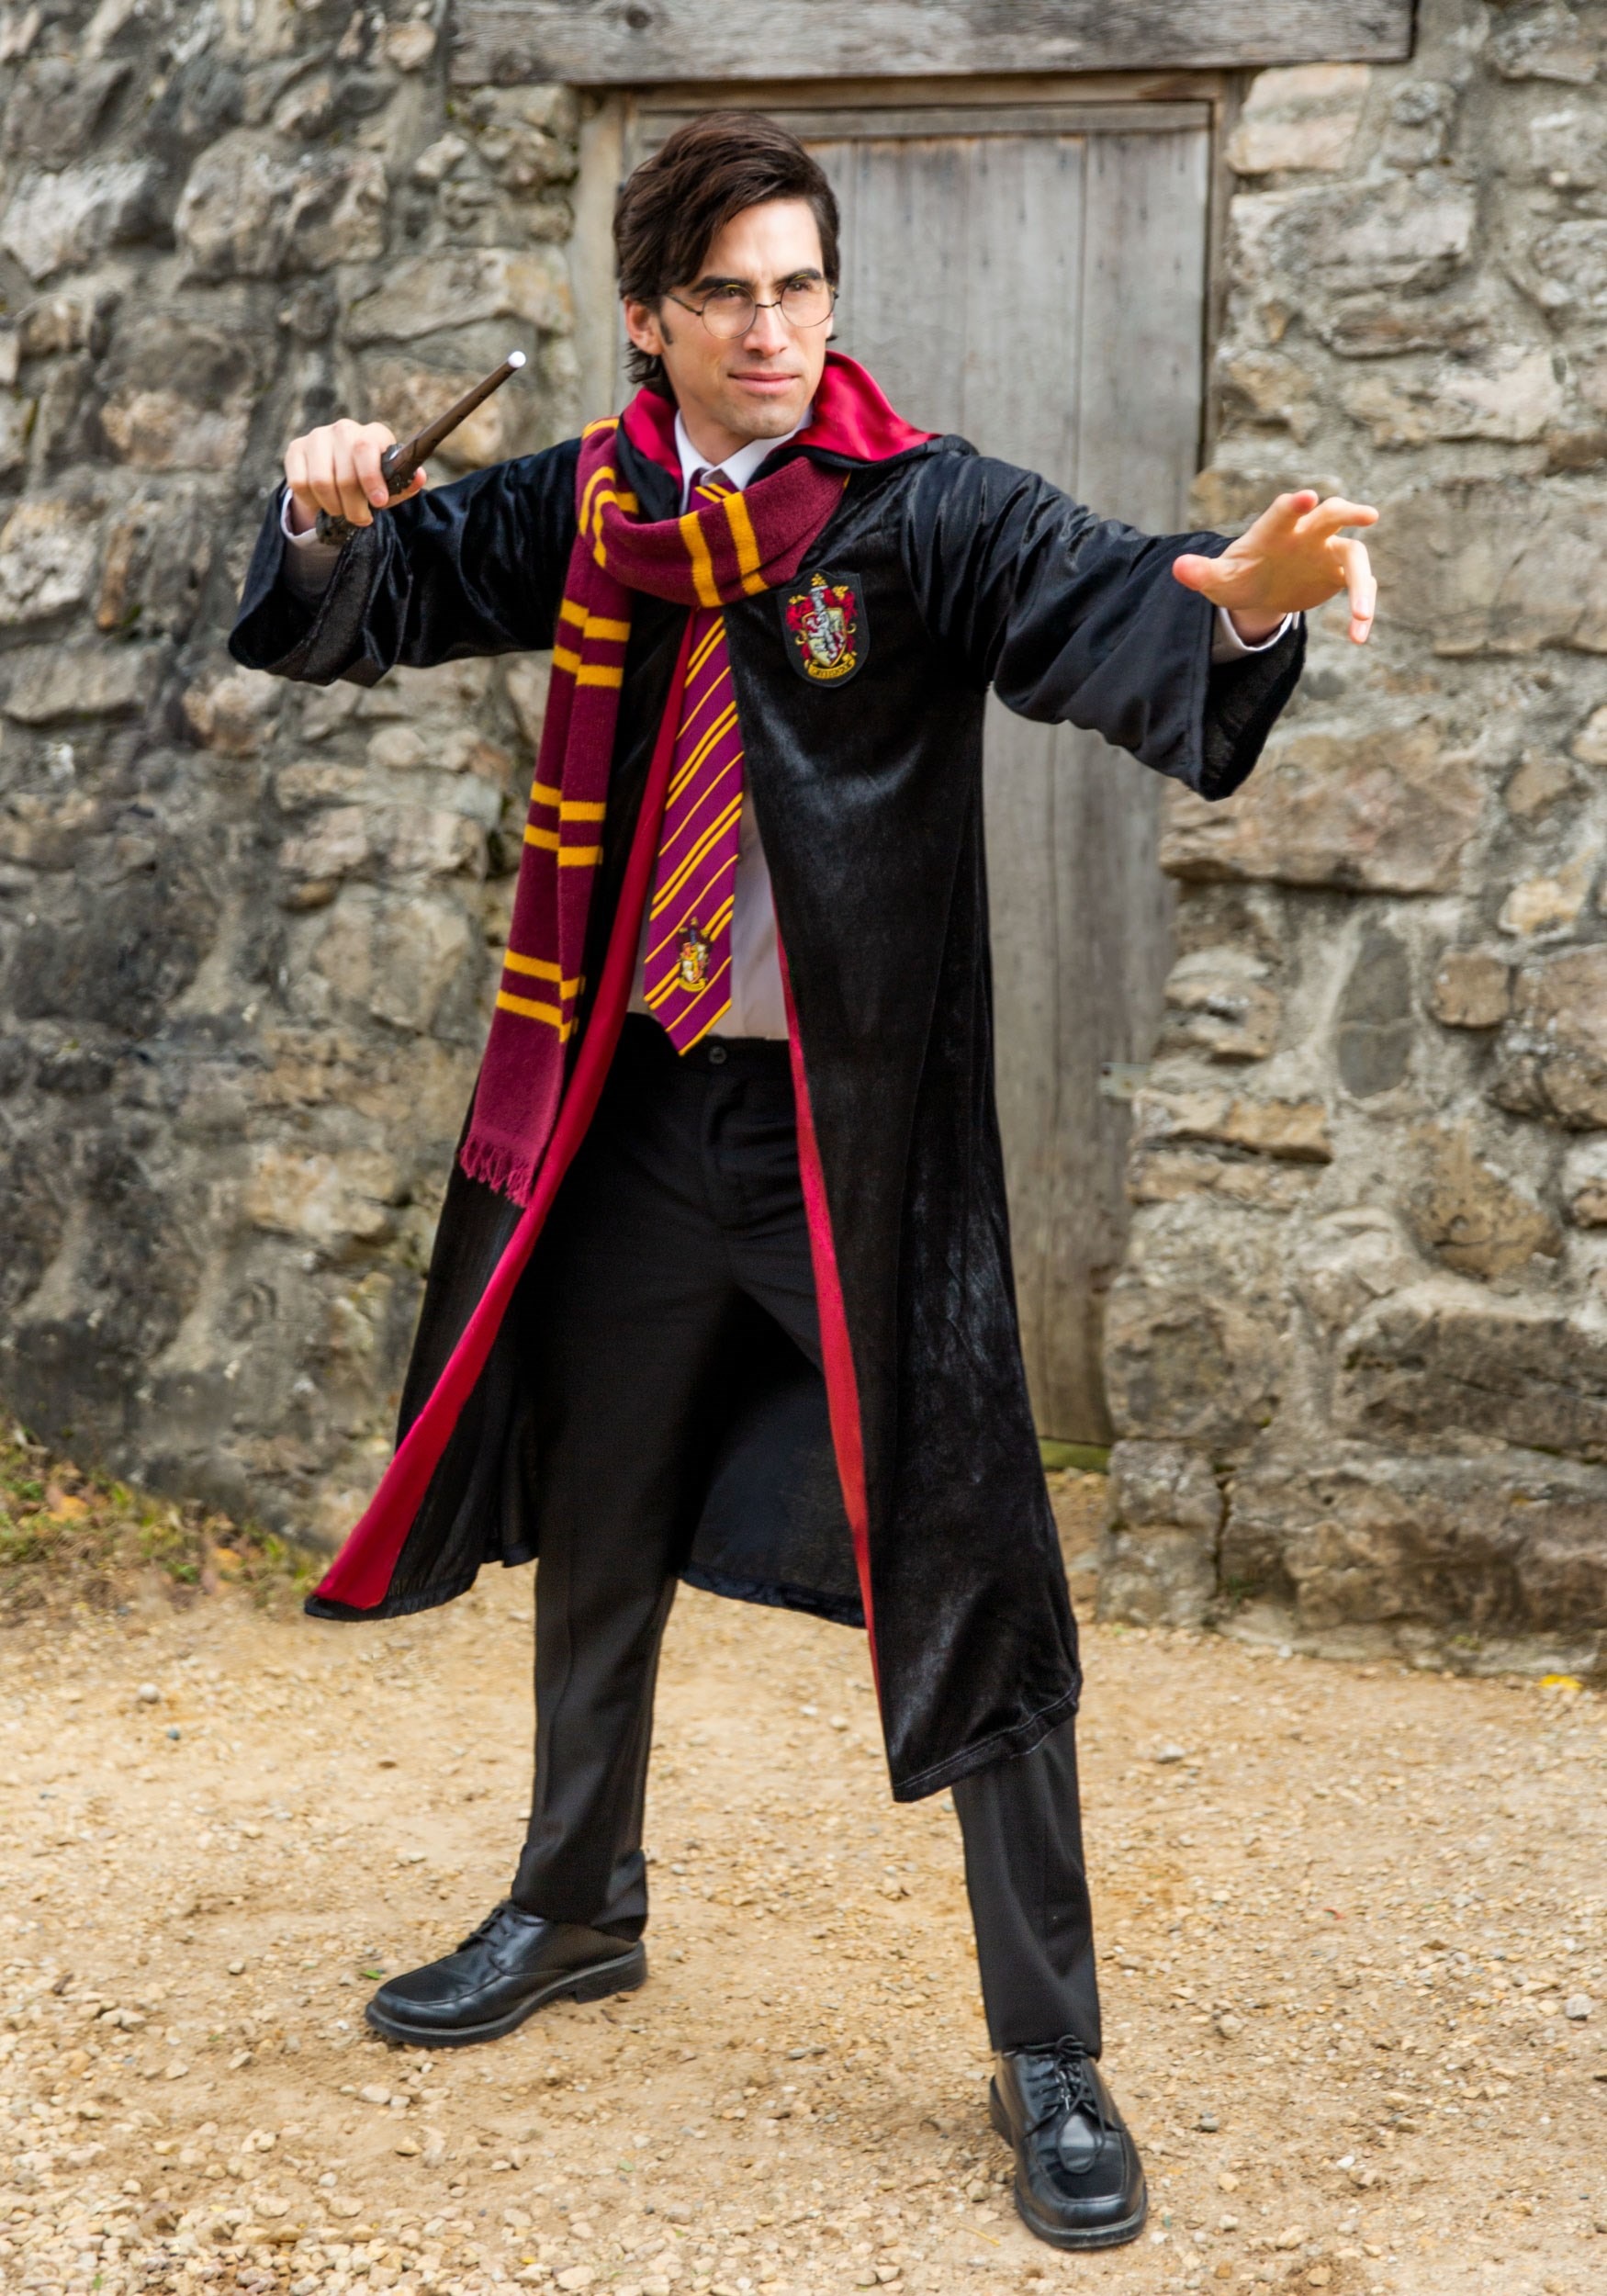 https://images.fun.com.au/products/62965/1-1/harry-potter-adult-deluxe-gryffindor-robe-plus-size.jpg